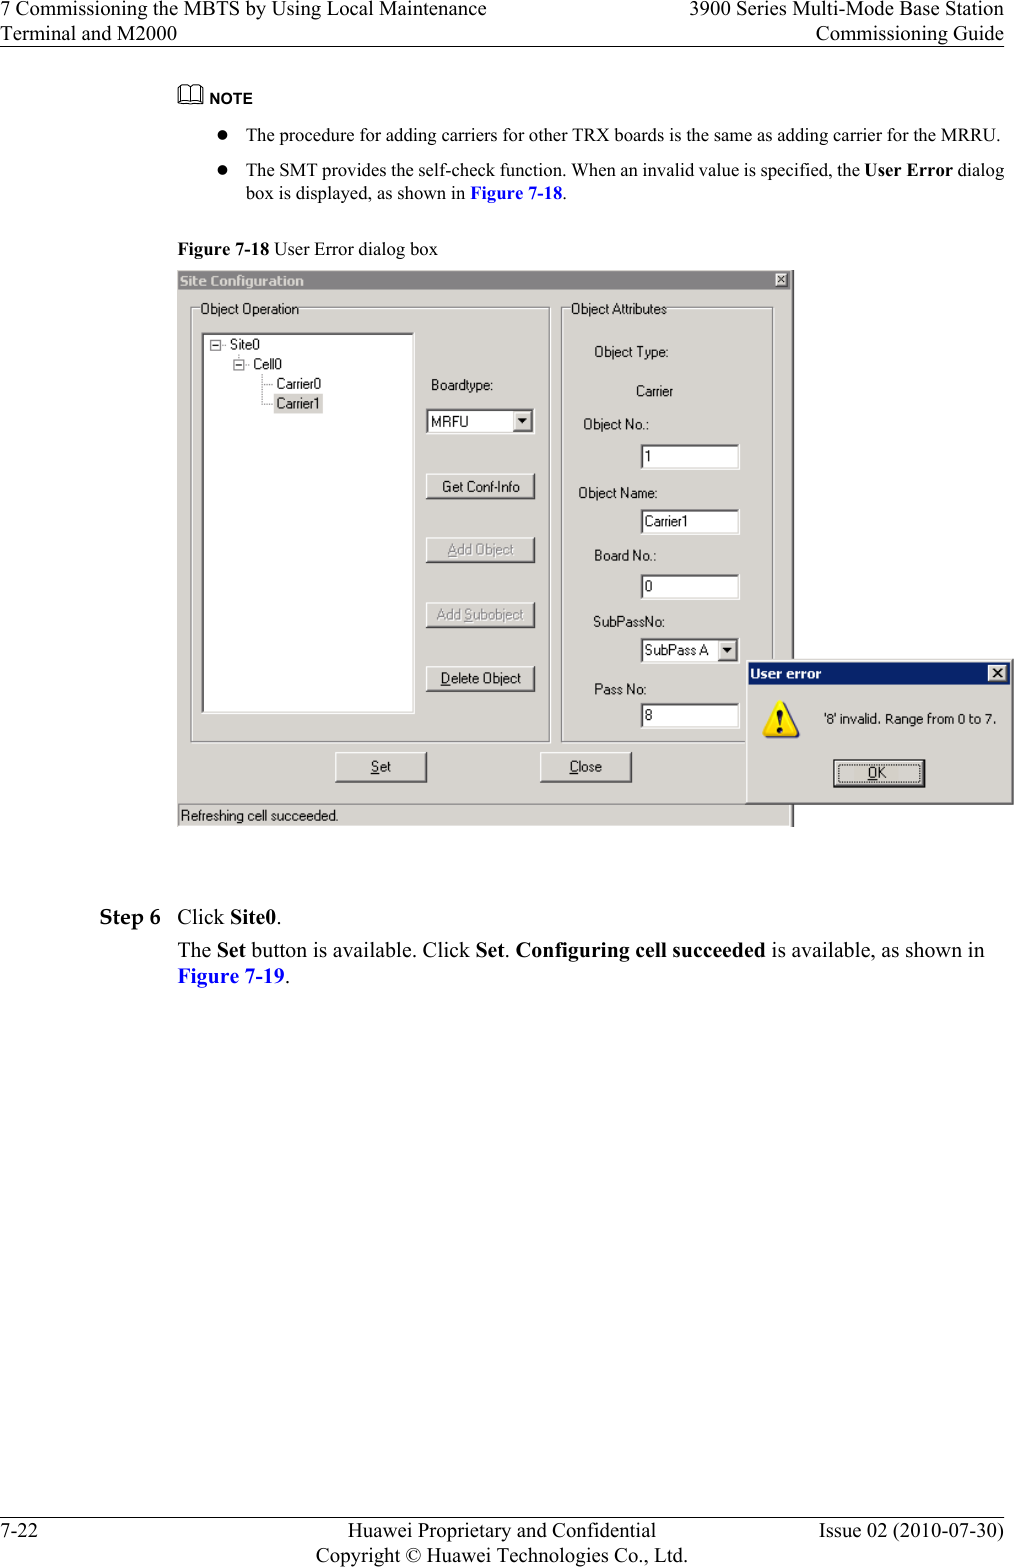 NOTElThe procedure for adding carriers for other TRX boards is the same as adding carrier for the MRRU.lThe SMT provides the self-check function. When an invalid value is specified, the User Error dialogbox is displayed, as shown in Figure 7-18.Figure 7-18 User Error dialog box Step 6 Click Site0.The Set button is available. Click Set. Configuring cell succeeded is available, as shown inFigure 7-19.7 Commissioning the MBTS by Using Local MaintenanceTerminal and M20003900 Series Multi-Mode Base StationCommissioning Guide7-22 Huawei Proprietary and ConfidentialCopyright © Huawei Technologies Co., Ltd.Issue 02 (2010-07-30)